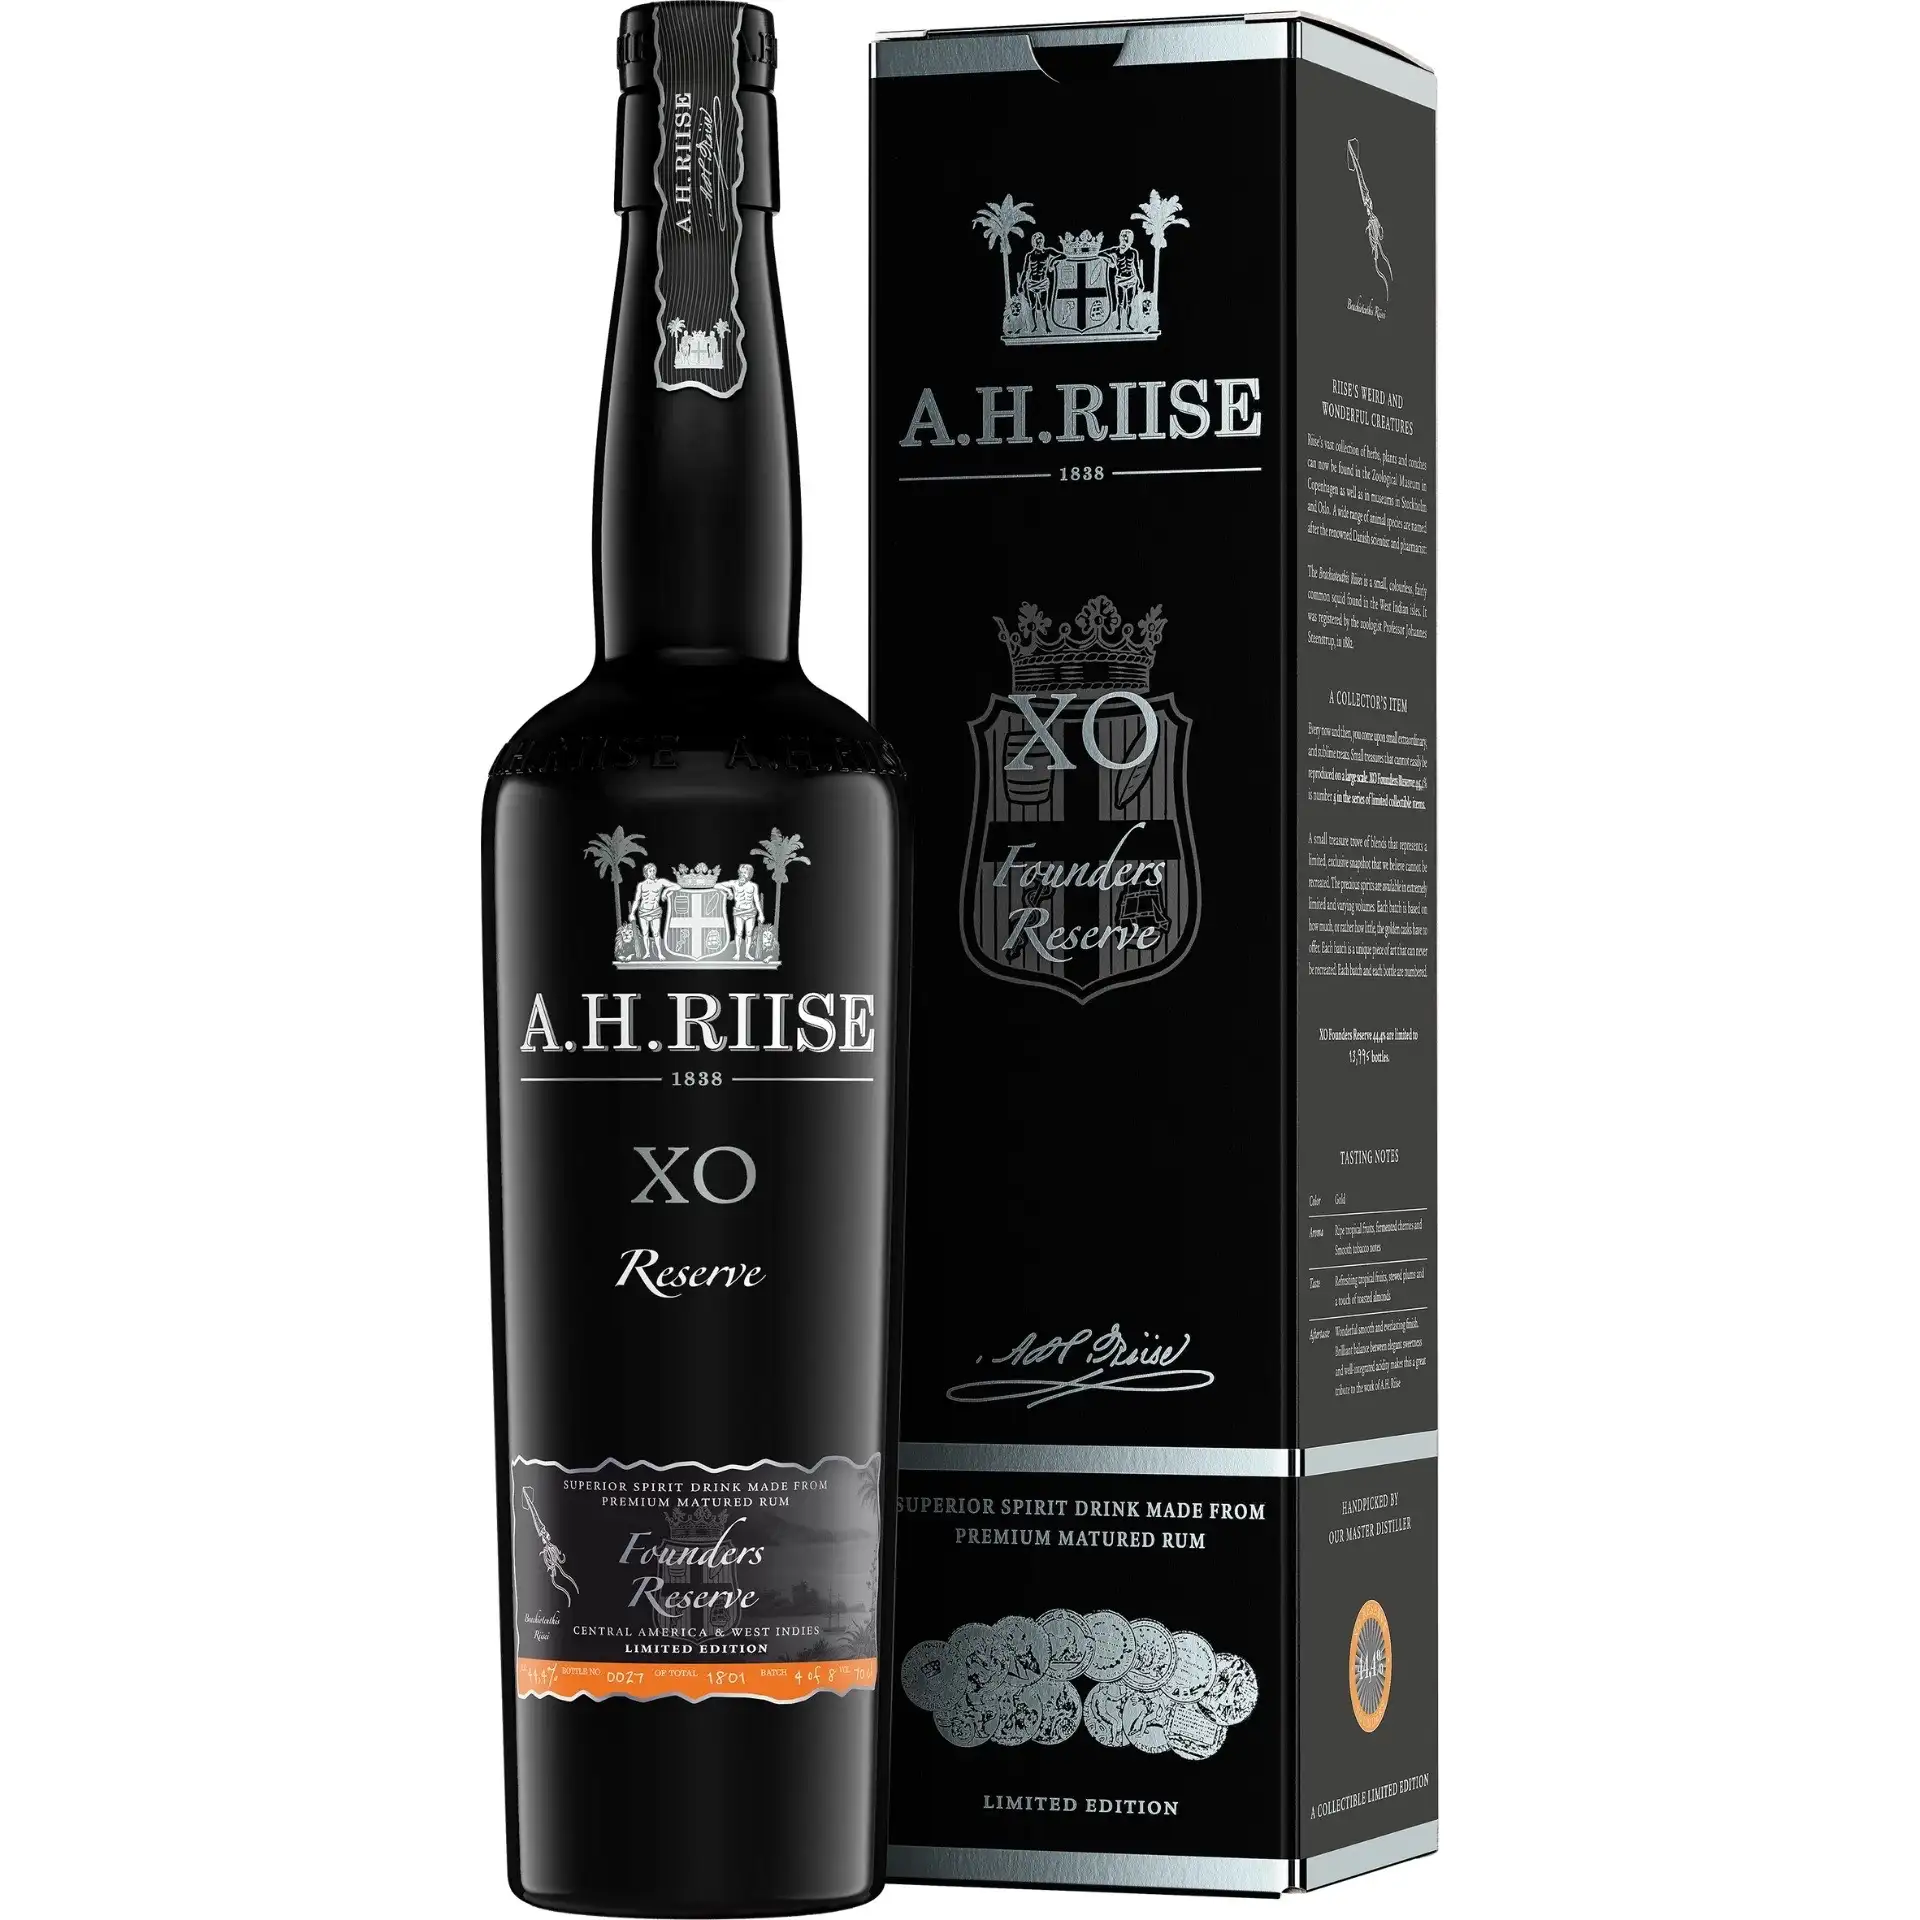 Image of the front of the bottle of the rum XO Founders Reserve 5th Edition